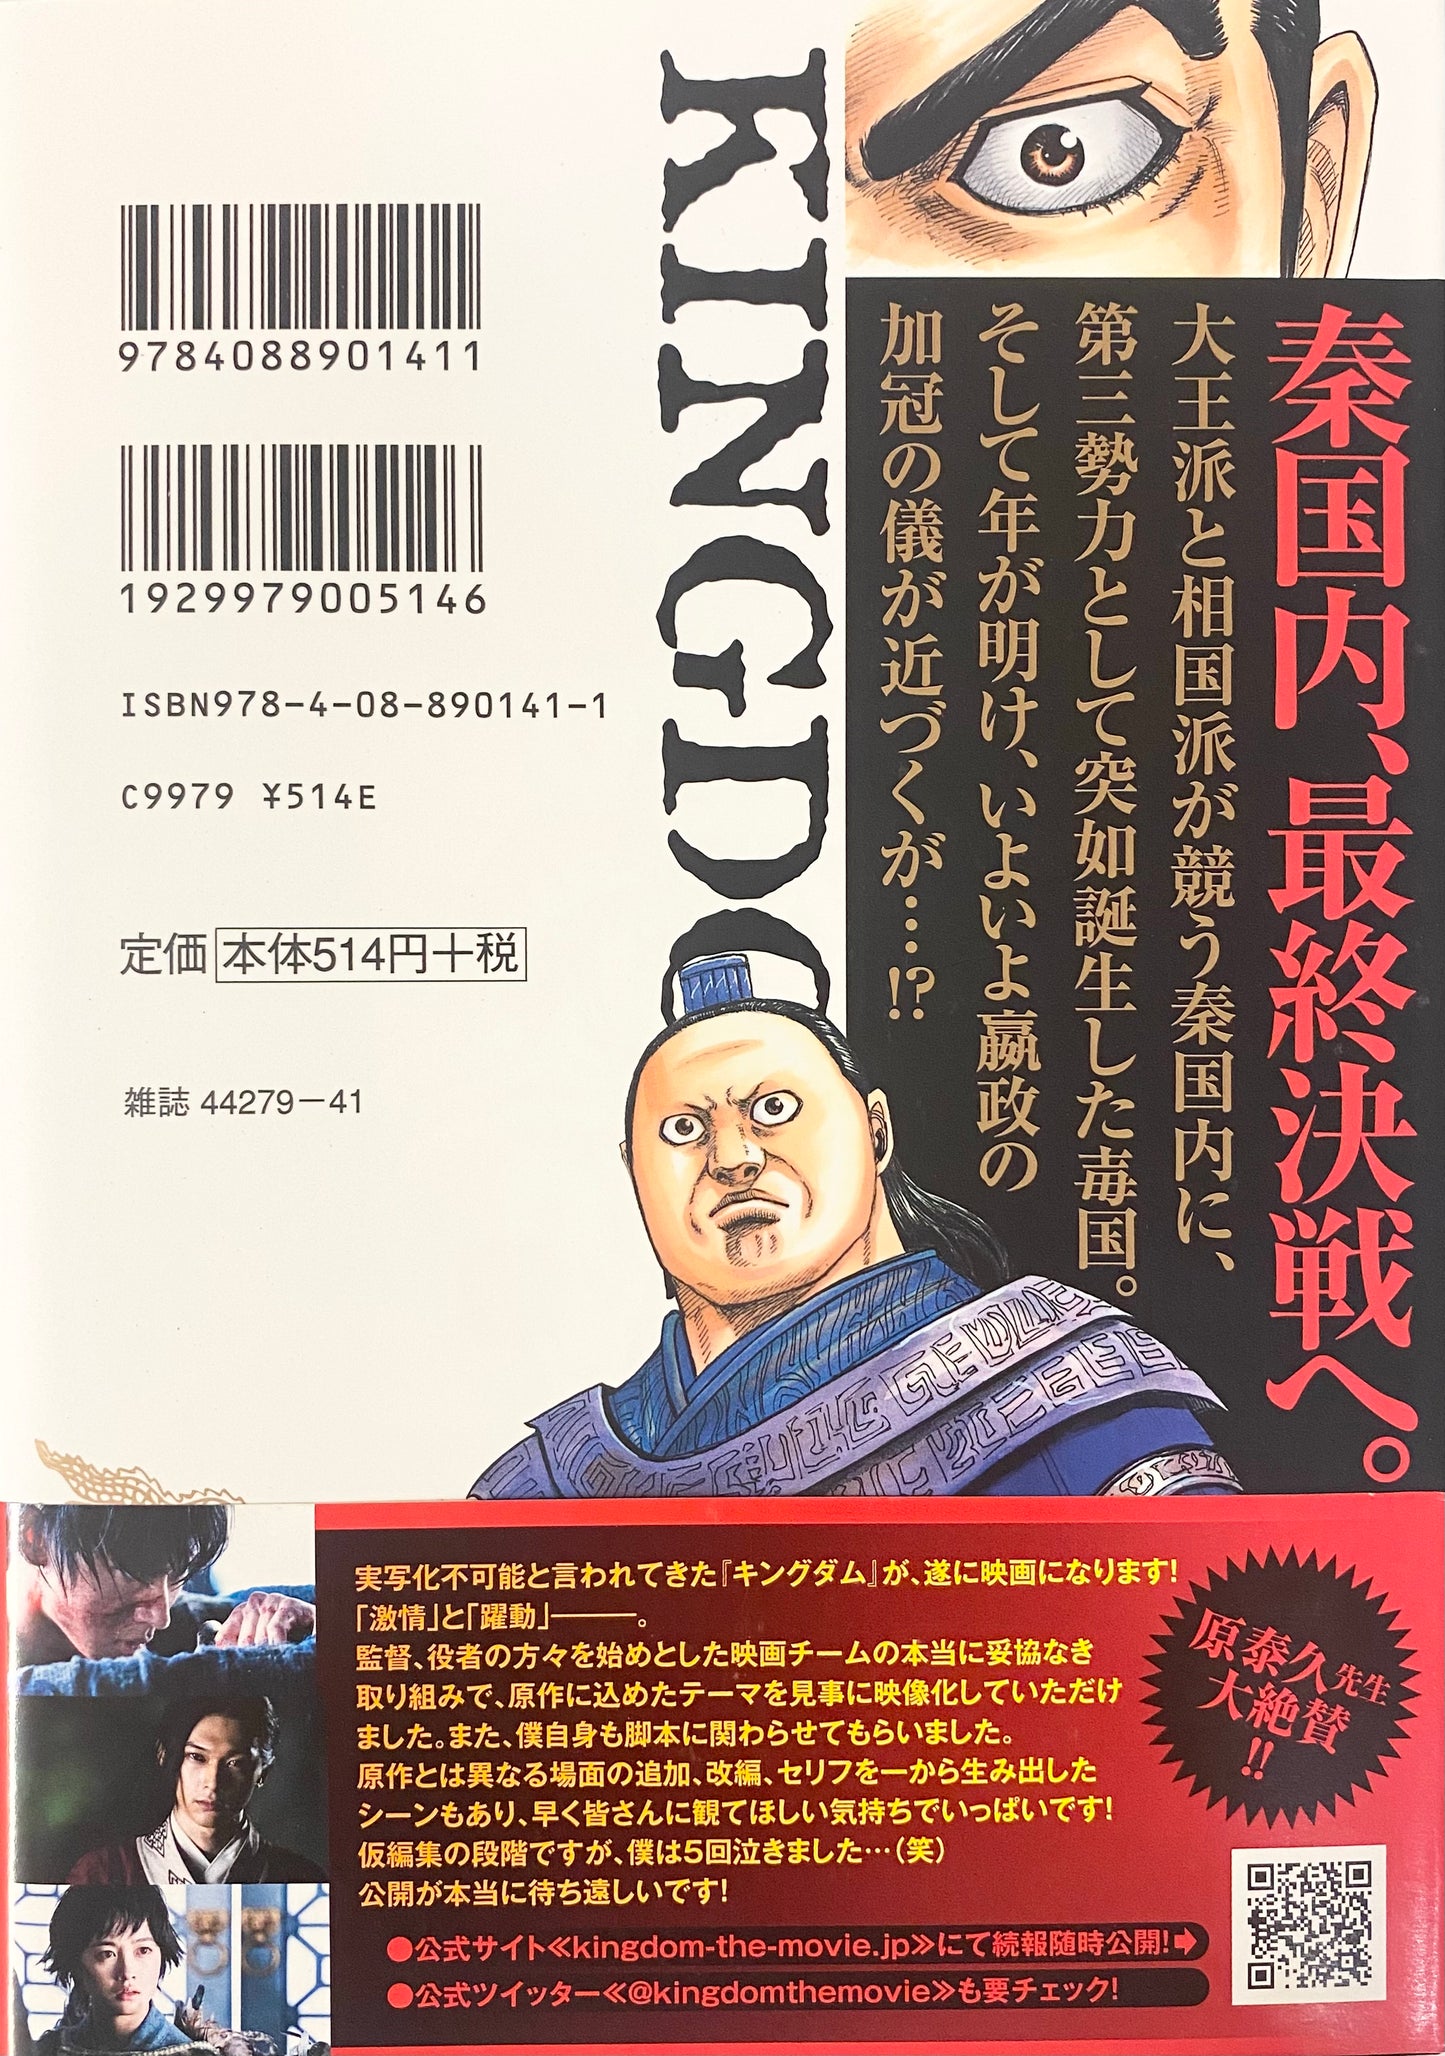 Kingdom Vol.38-Official Japanese Edition